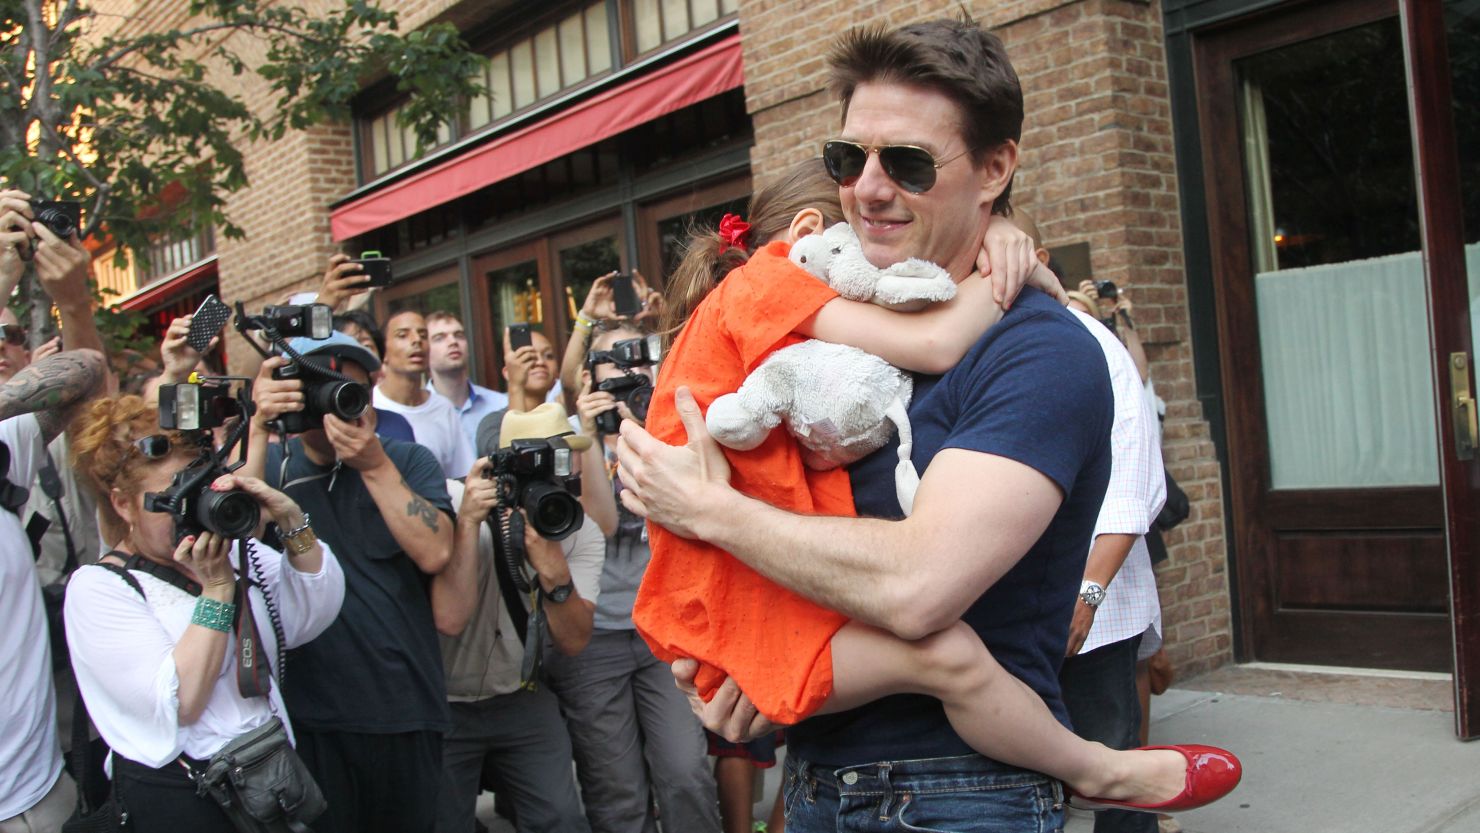 "I have in no way cut Suri out of my life," Tom Cruise says of his young daughter.